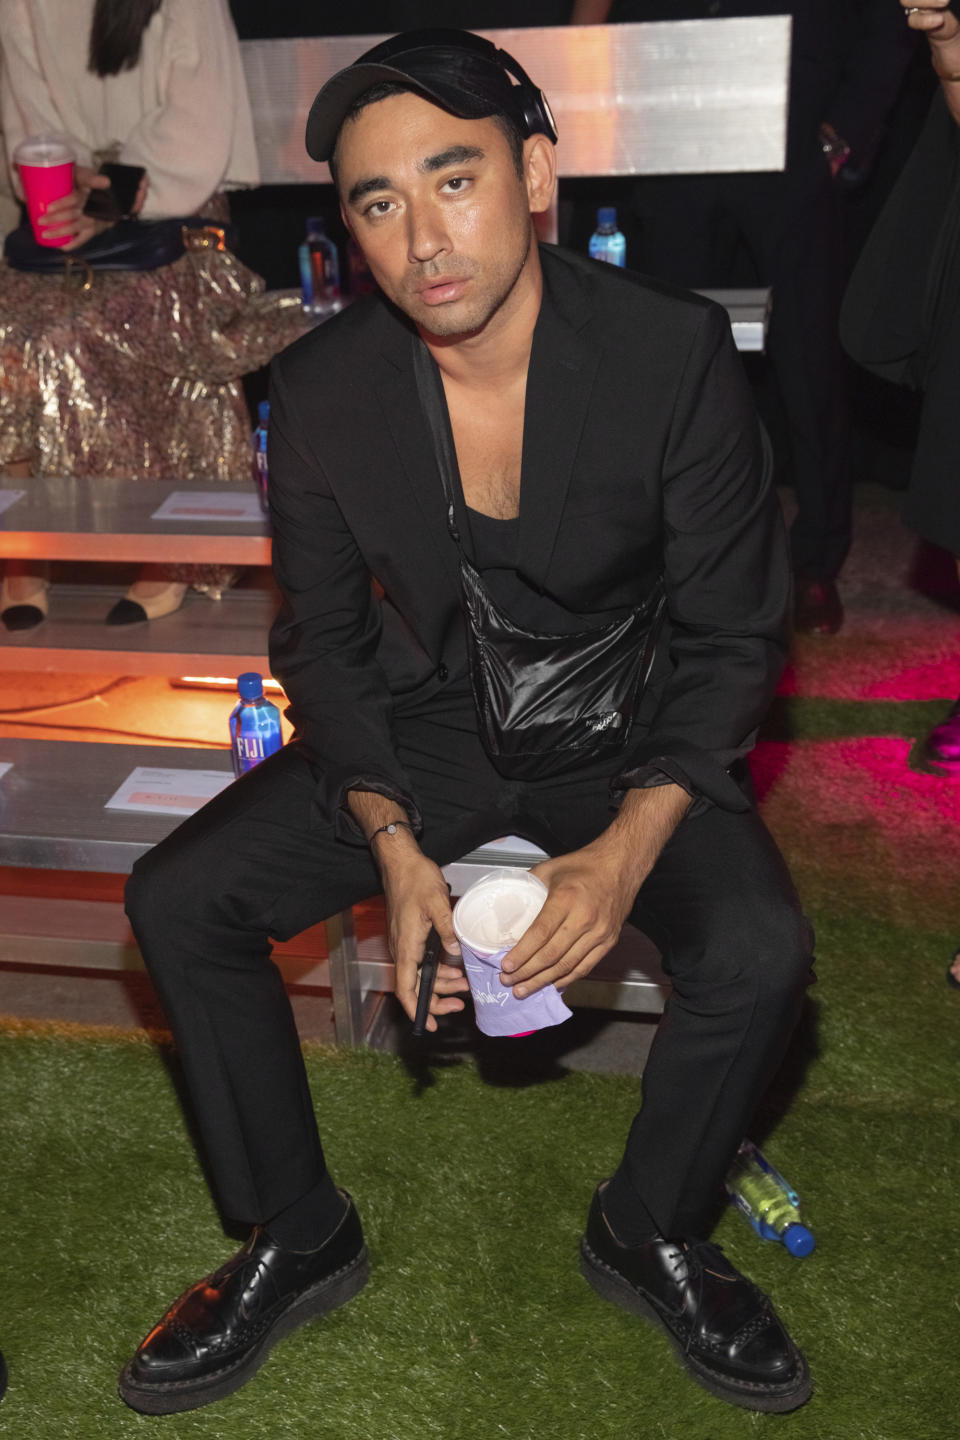 Nicola Formichetti attends the Brandon Maxwell runway show during NYFW Spring/Summer 2020 on Saturday, Sept. 7, 2019, in the Brooklyn borough of New York. (Photo by Brent N. Clarke/Invision/AP